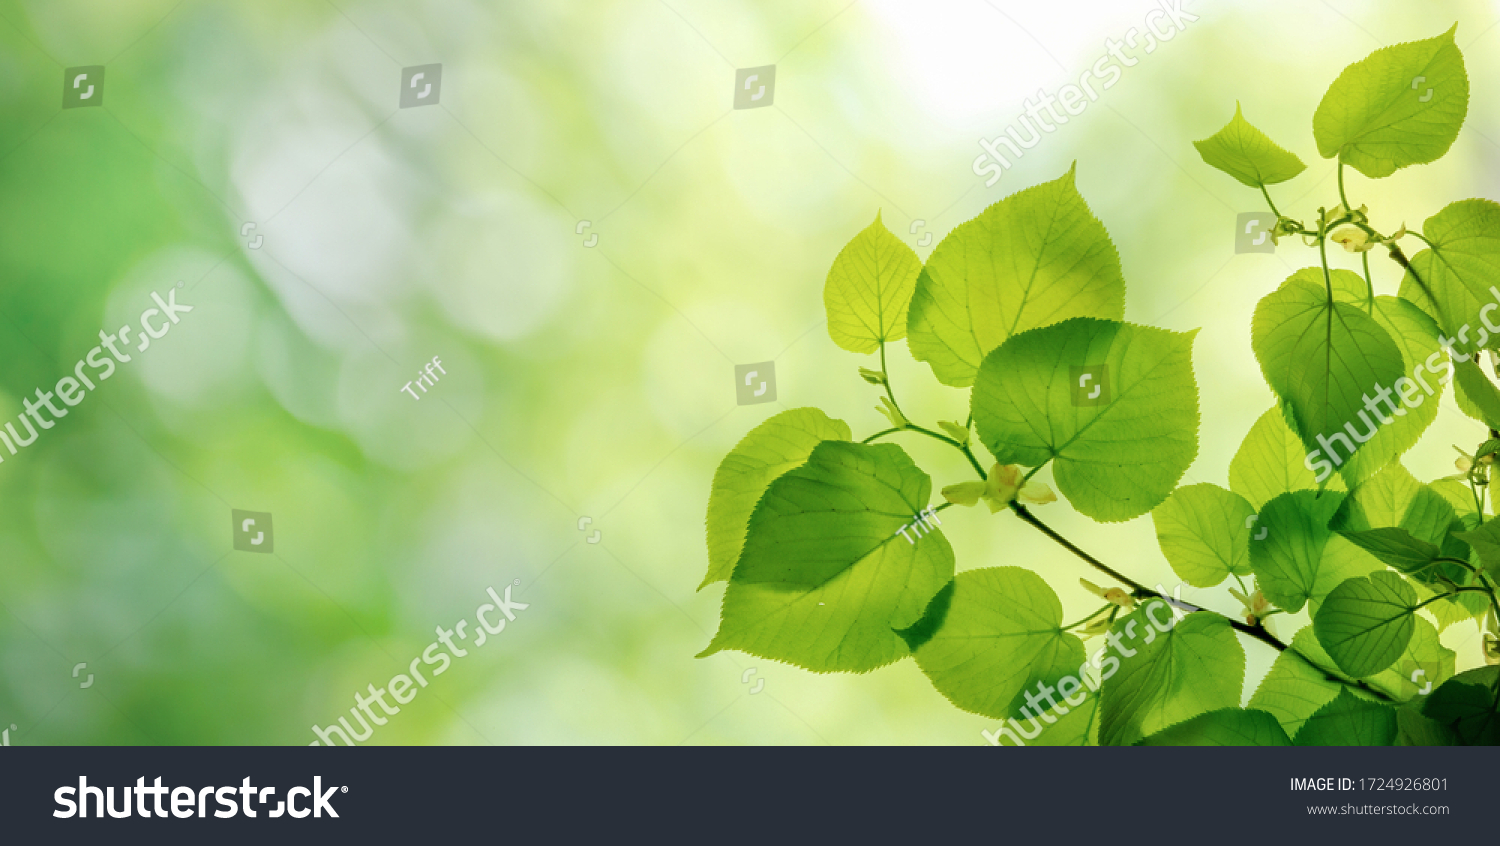 Green leaves on elm tree. Nature spring and summer background.   #1724926801